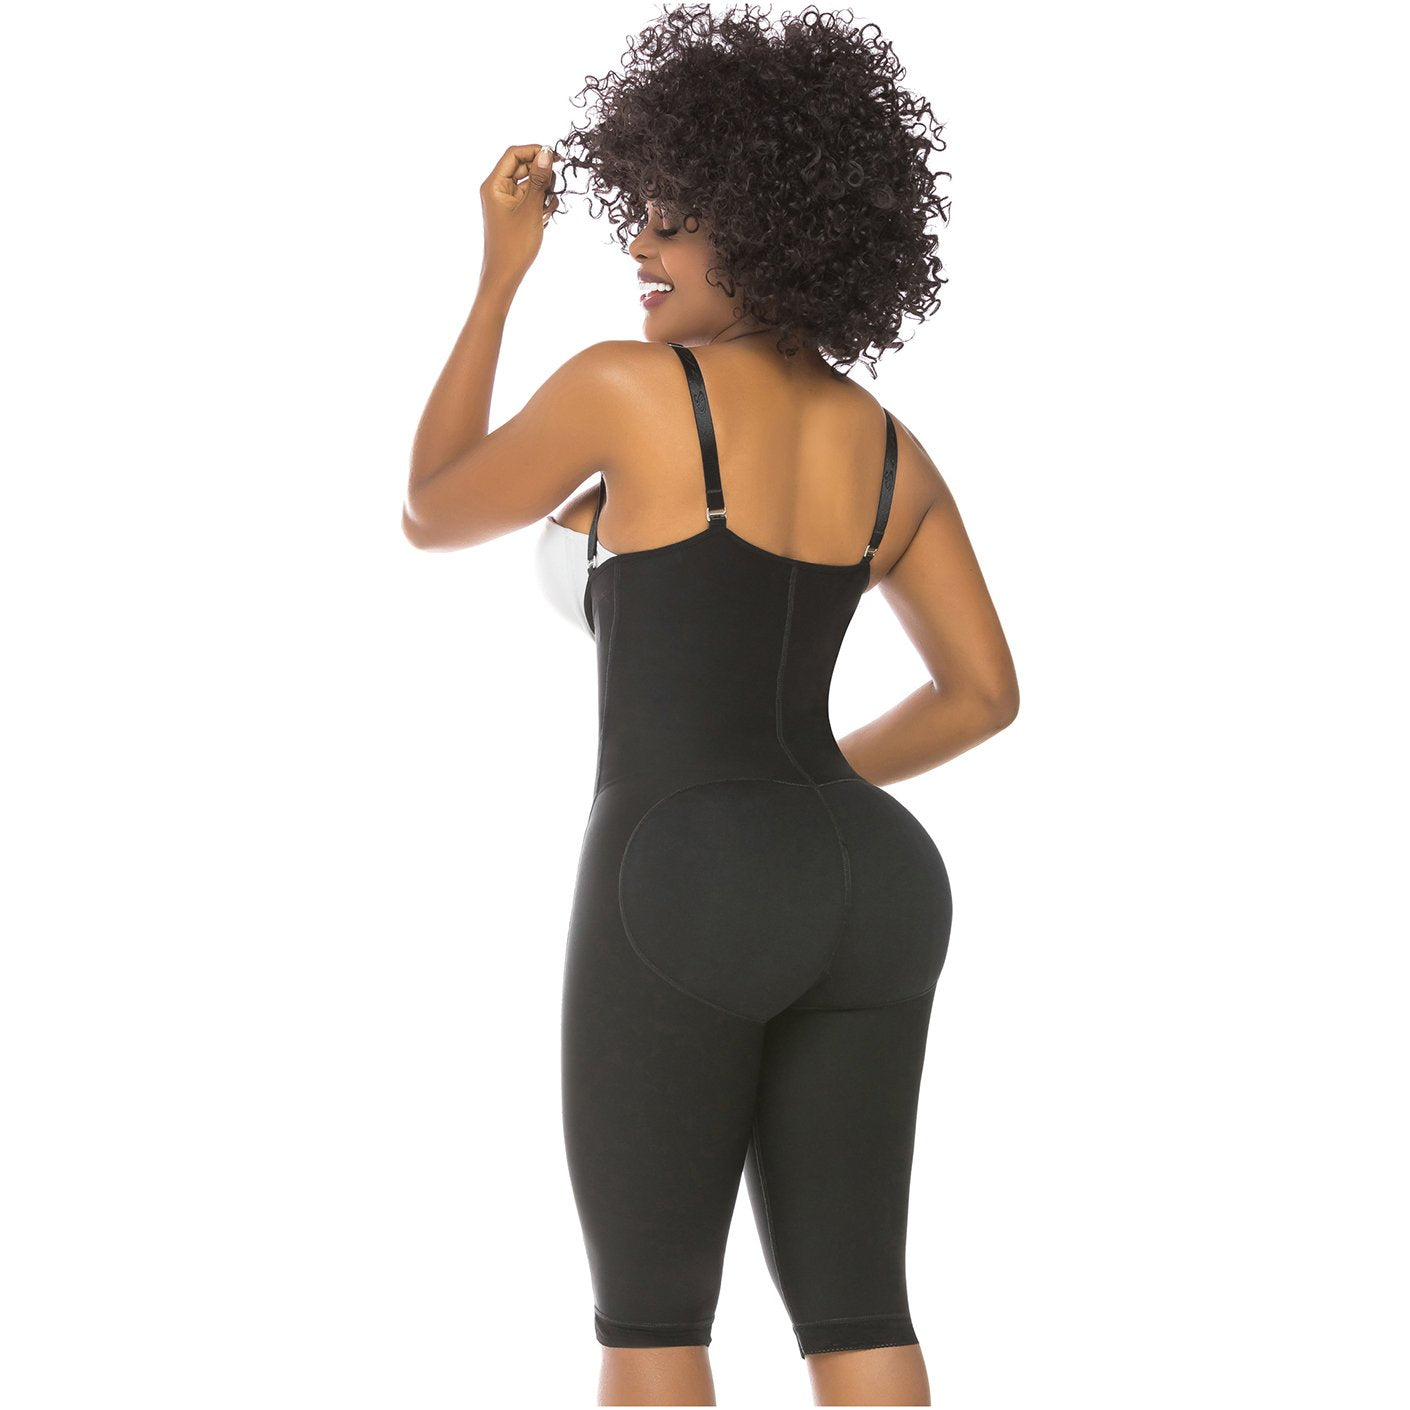 Mid Thigh Strapless Body Shaper for Dresses